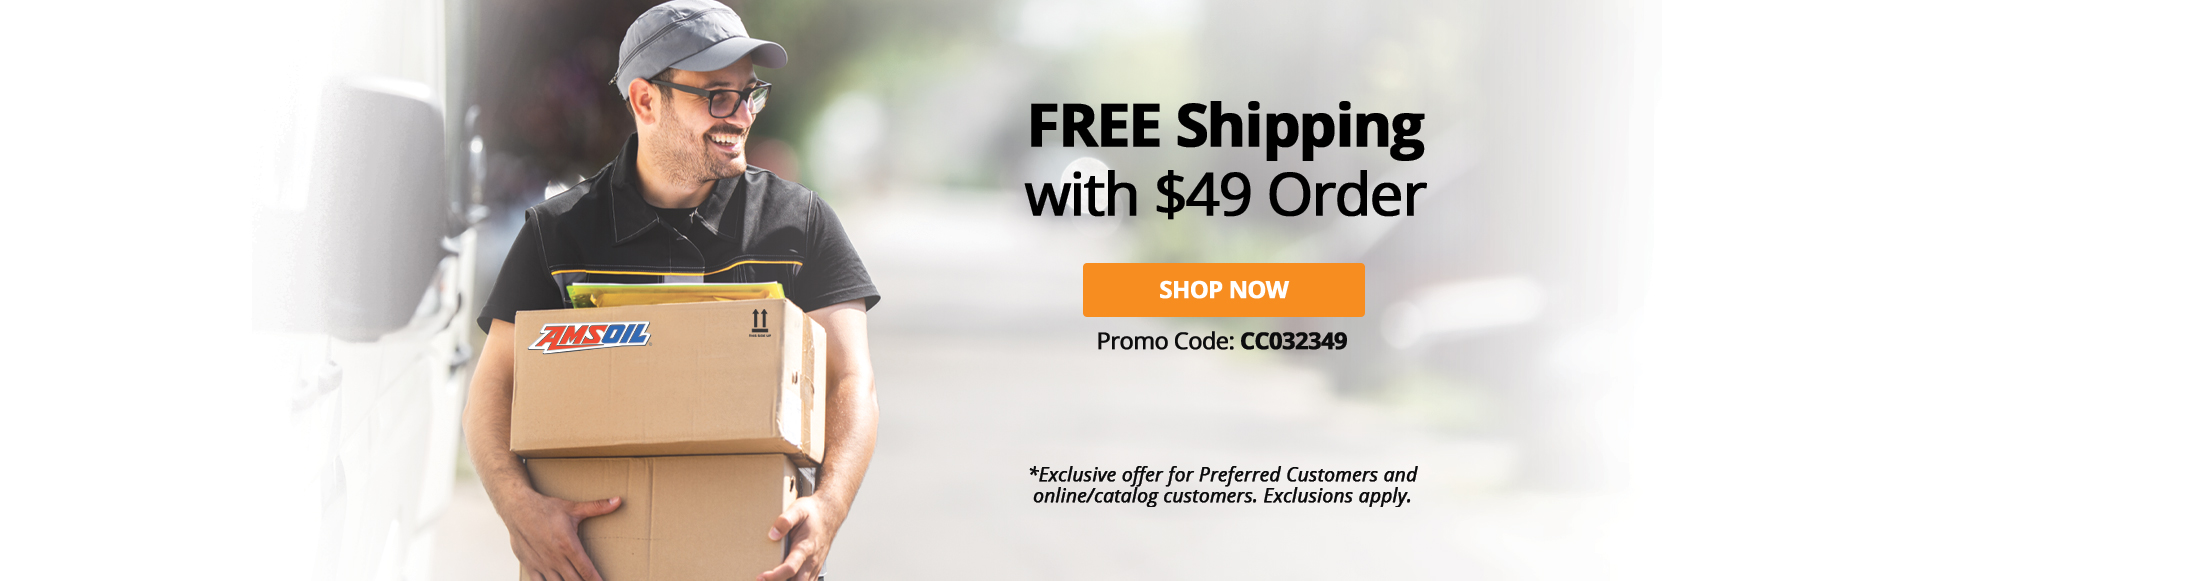 Free shipping with $49 order 